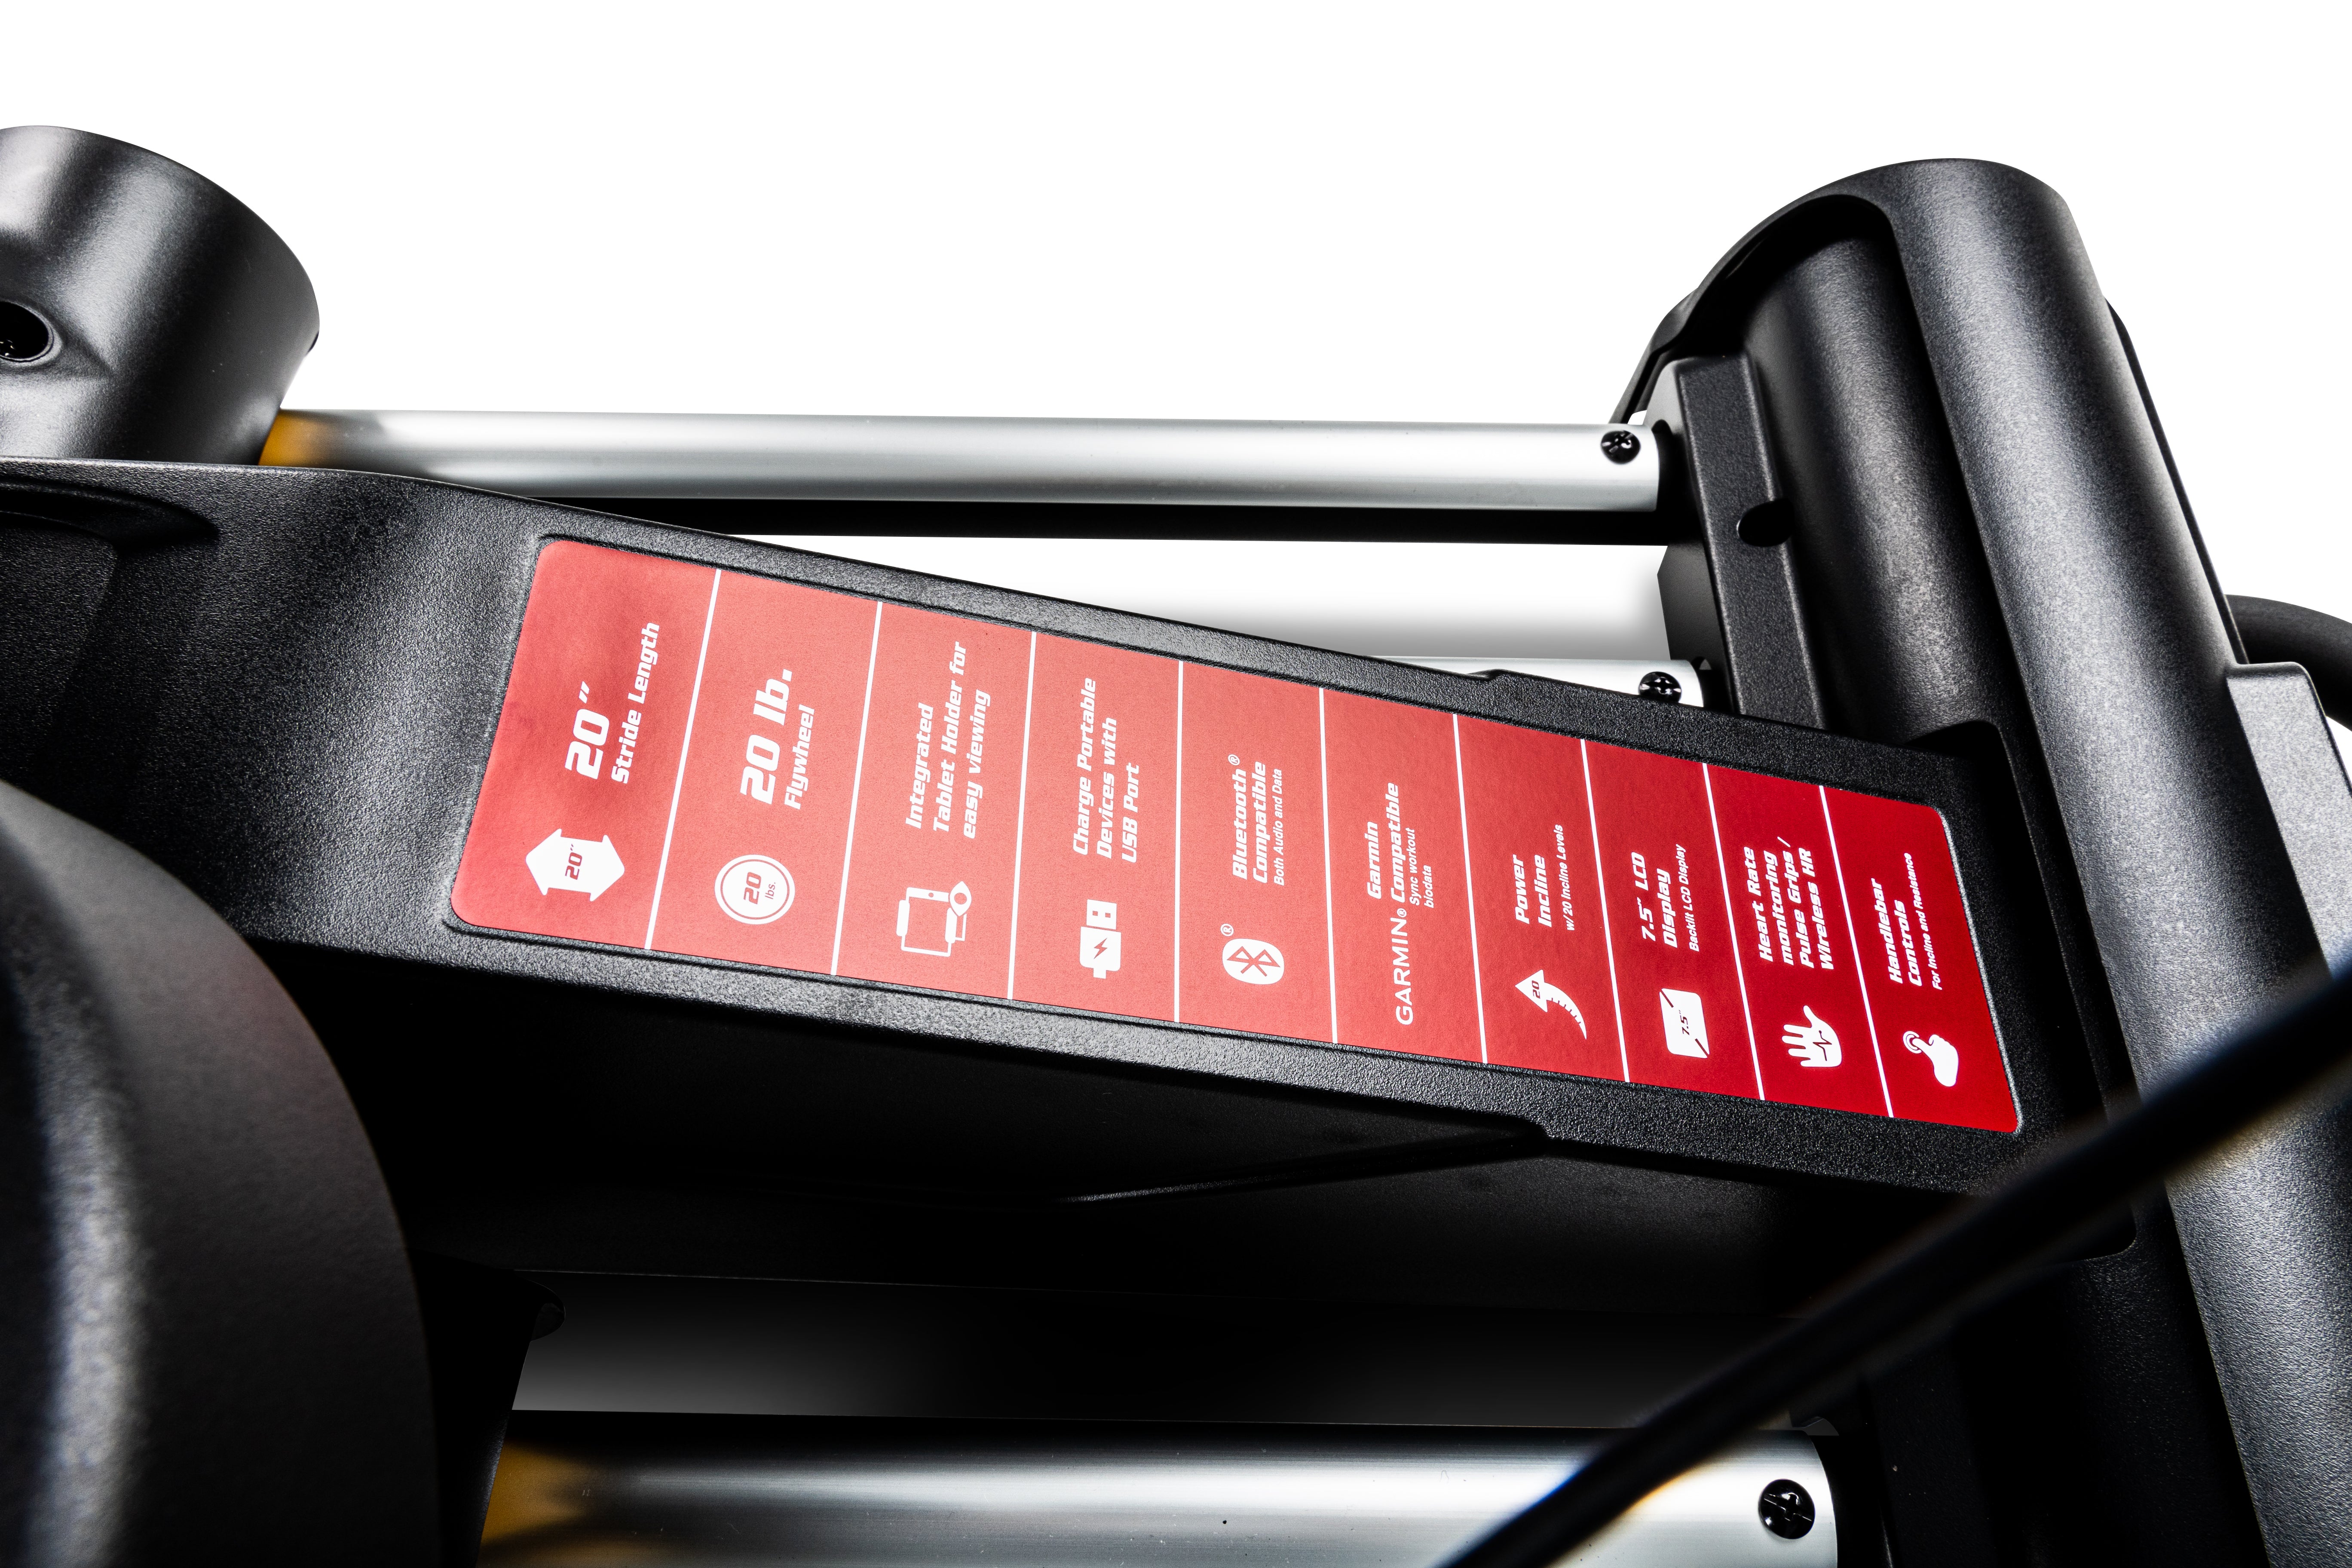 Close-up of the Sole E25 elliptical's red instruction sticker, detailing various operational guidelines and icons, affixed to its black frame near joint connectors.